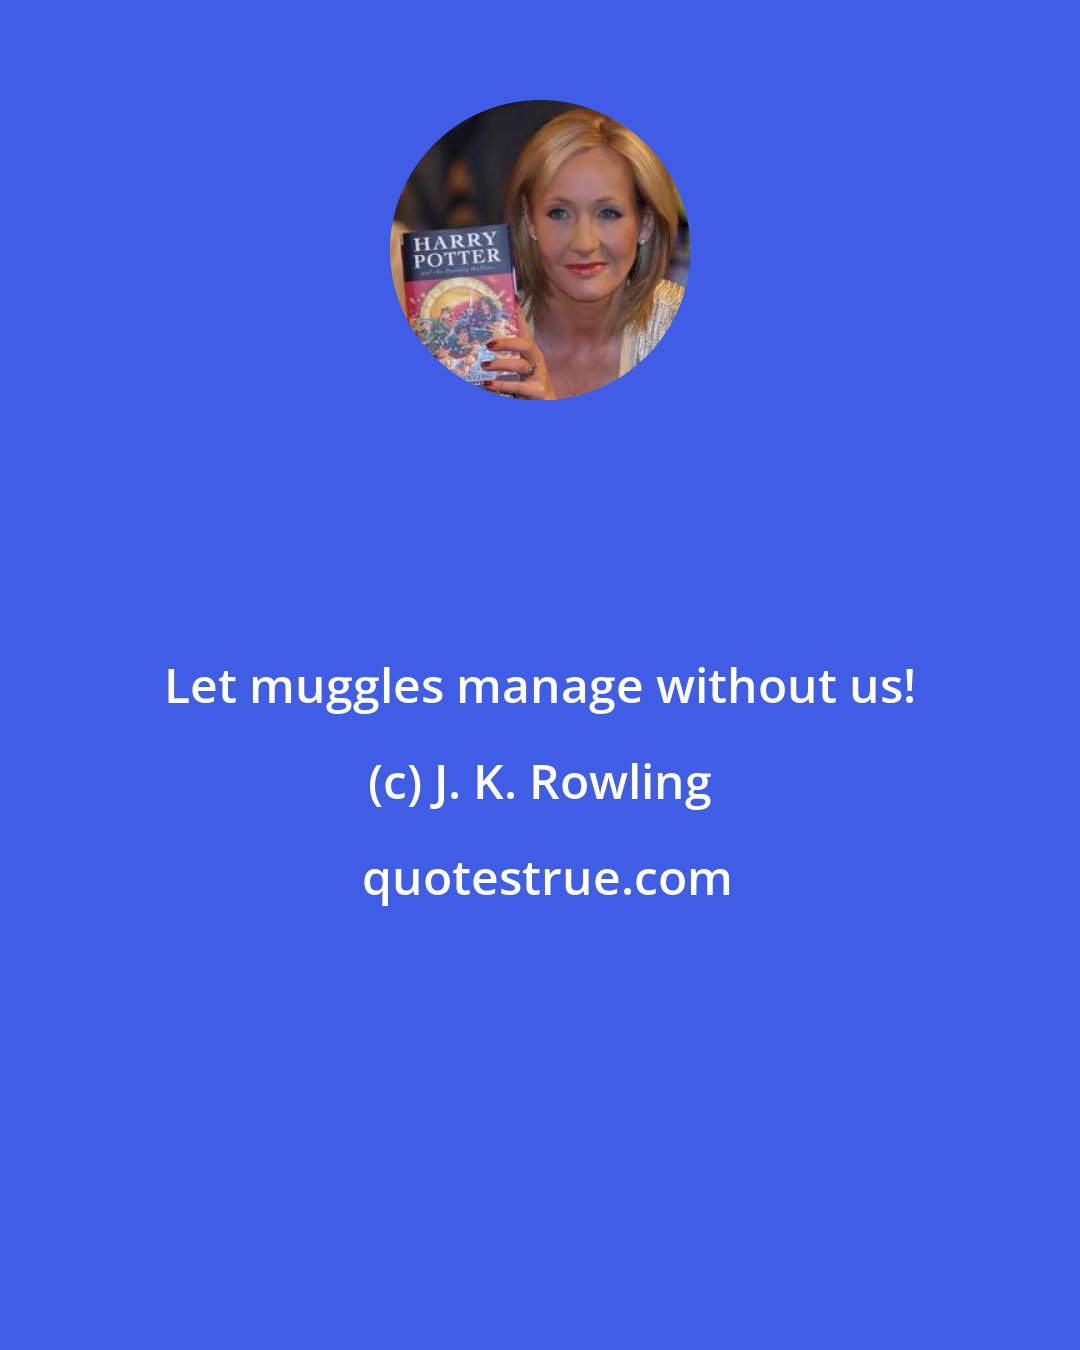 J. K. Rowling: Let muggles manage without us!